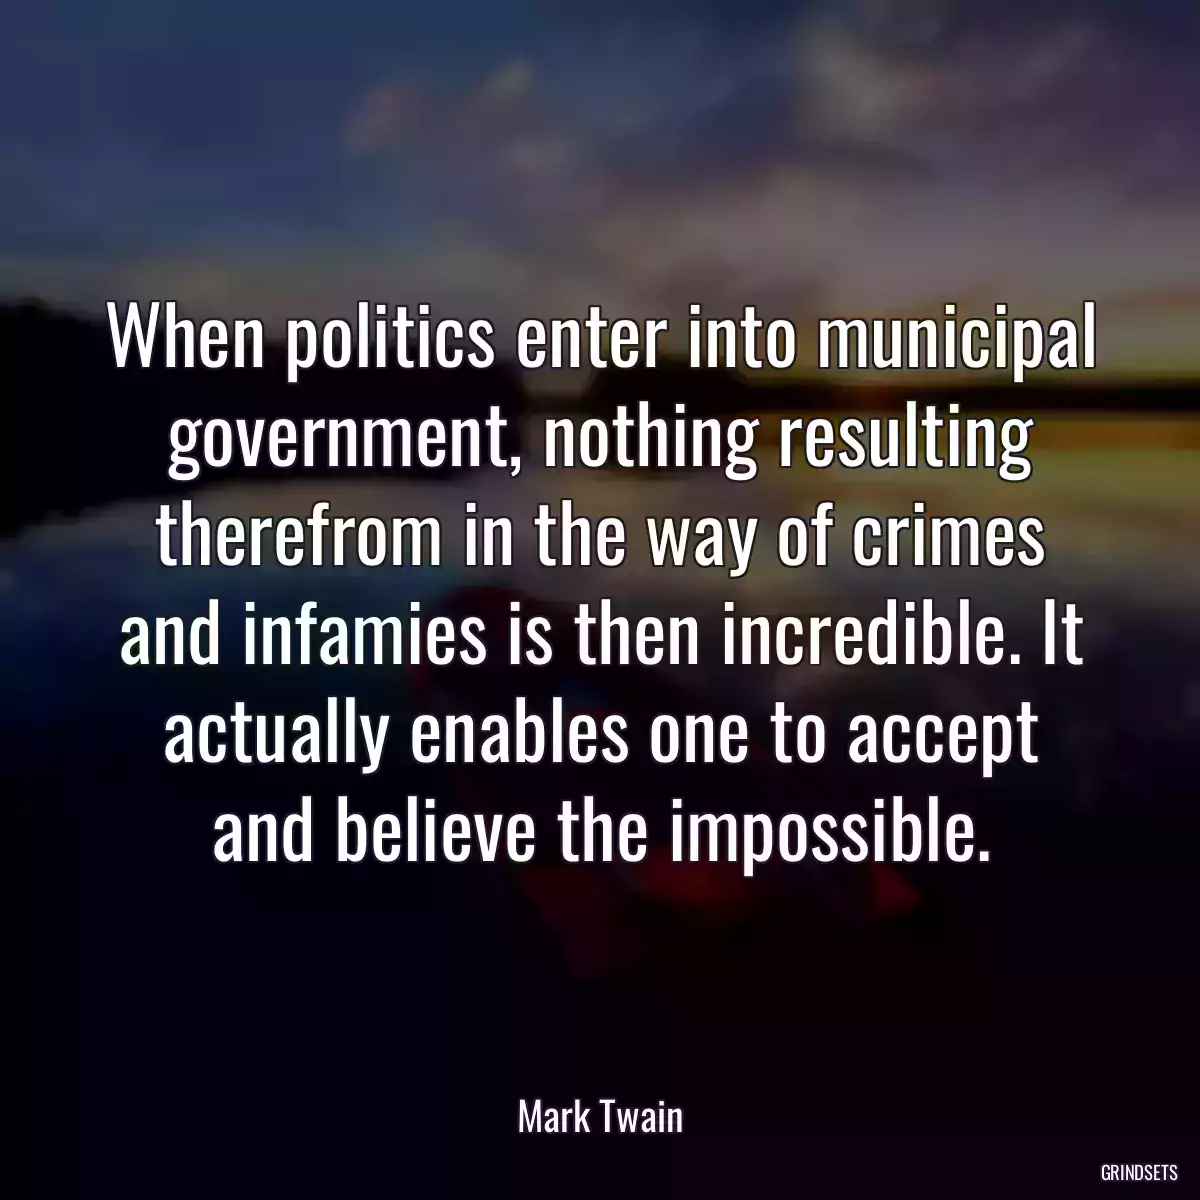 When politics enter into municipal government, nothing resulting therefrom in the way of crimes and infamies is then incredible. It actually enables one to accept and believe the impossible.